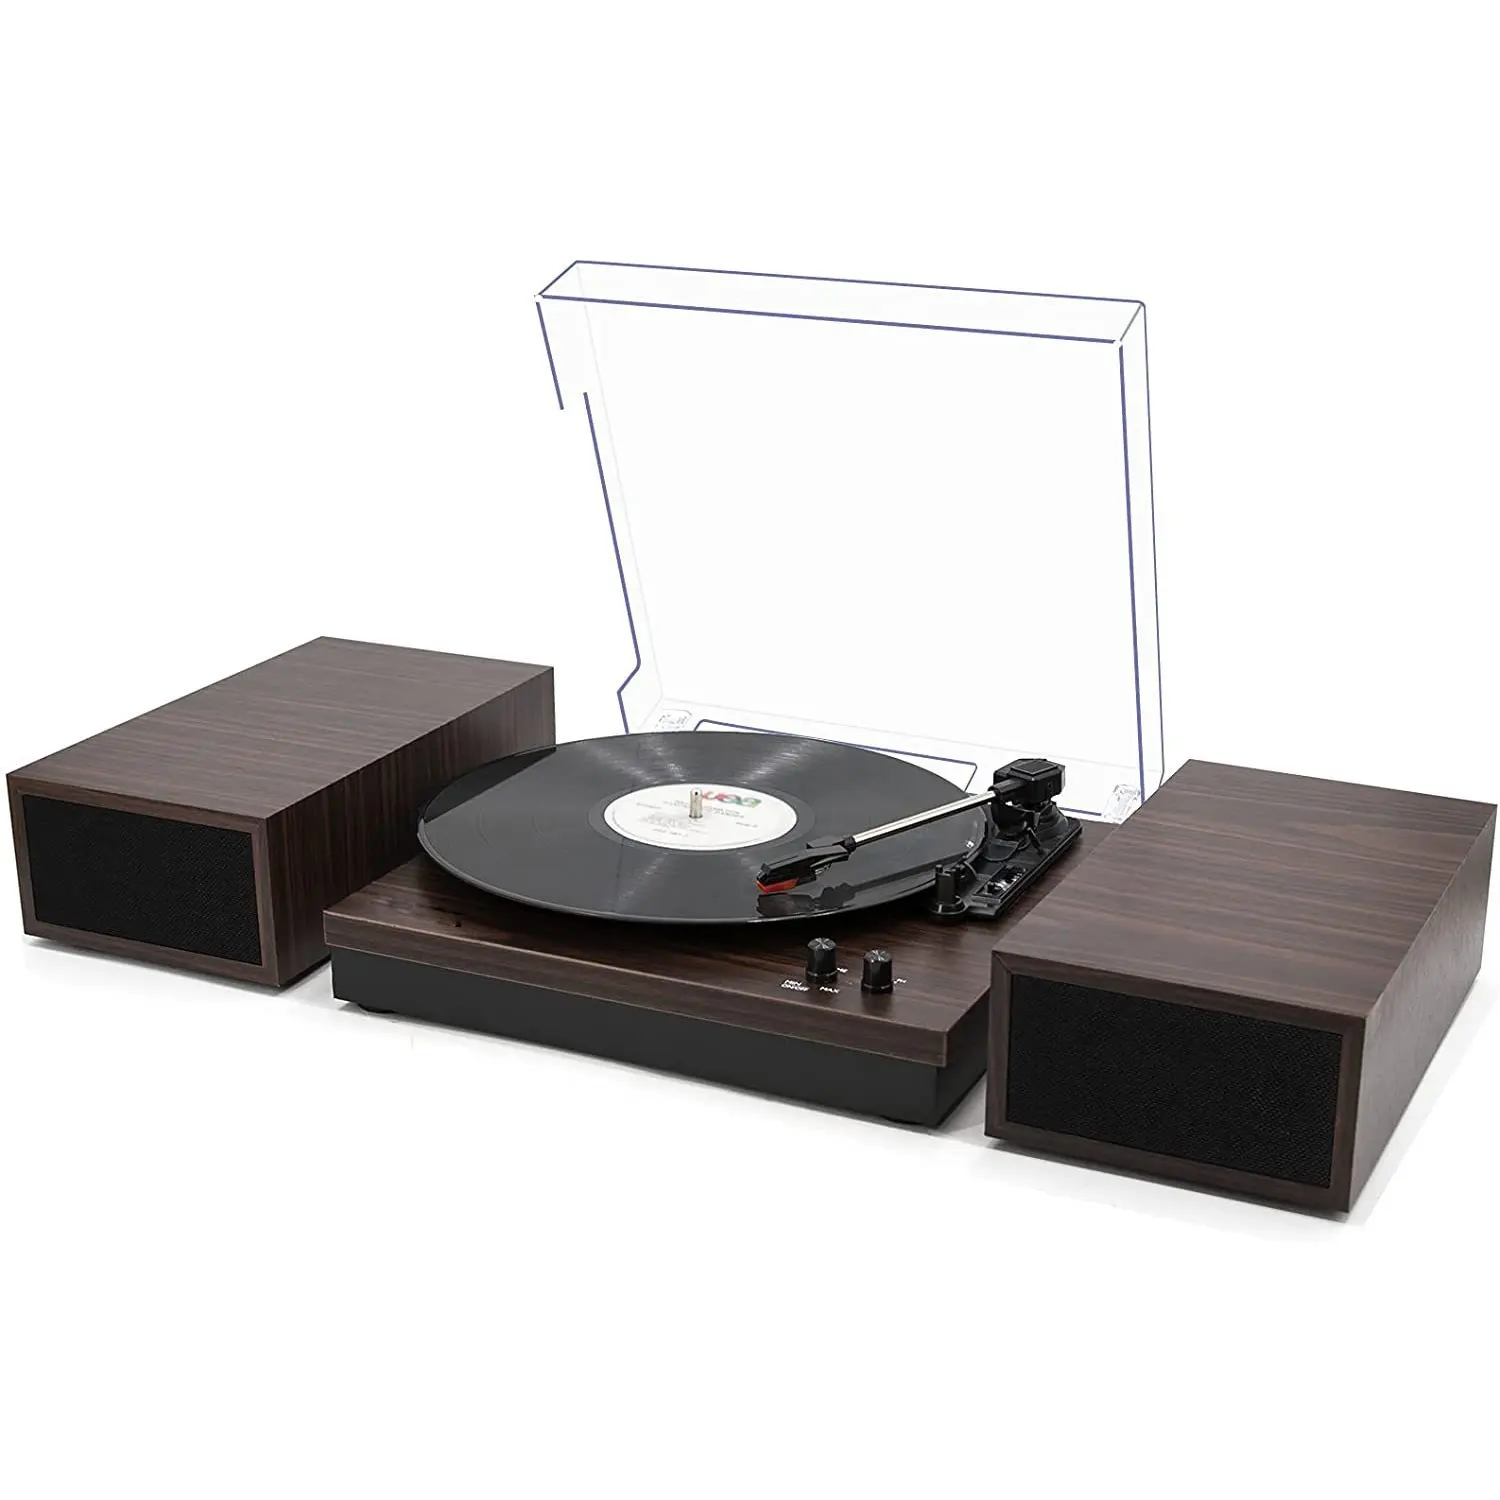 Retro Wooden Vinyl Record Player Turntable with Bluetooth Connectivity and Stereo Speakers